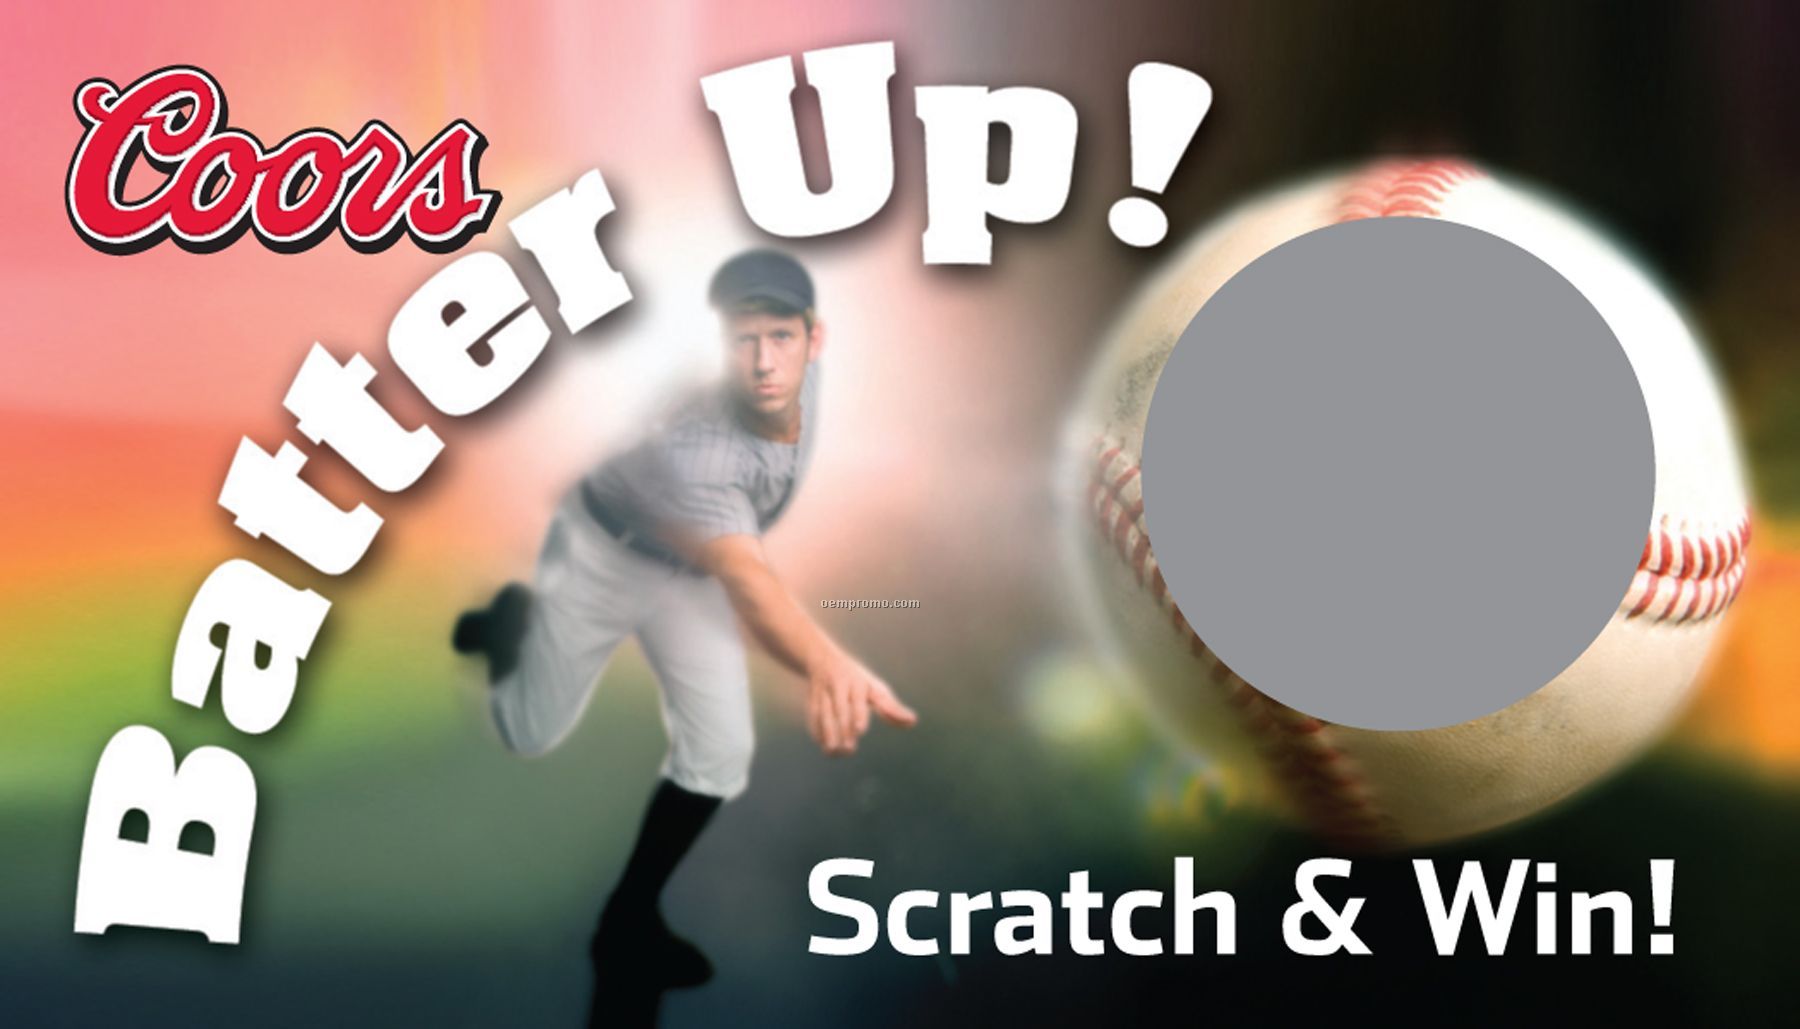 Scratch Off Cards - Batter Up Scratch And Win (4.25"X6")